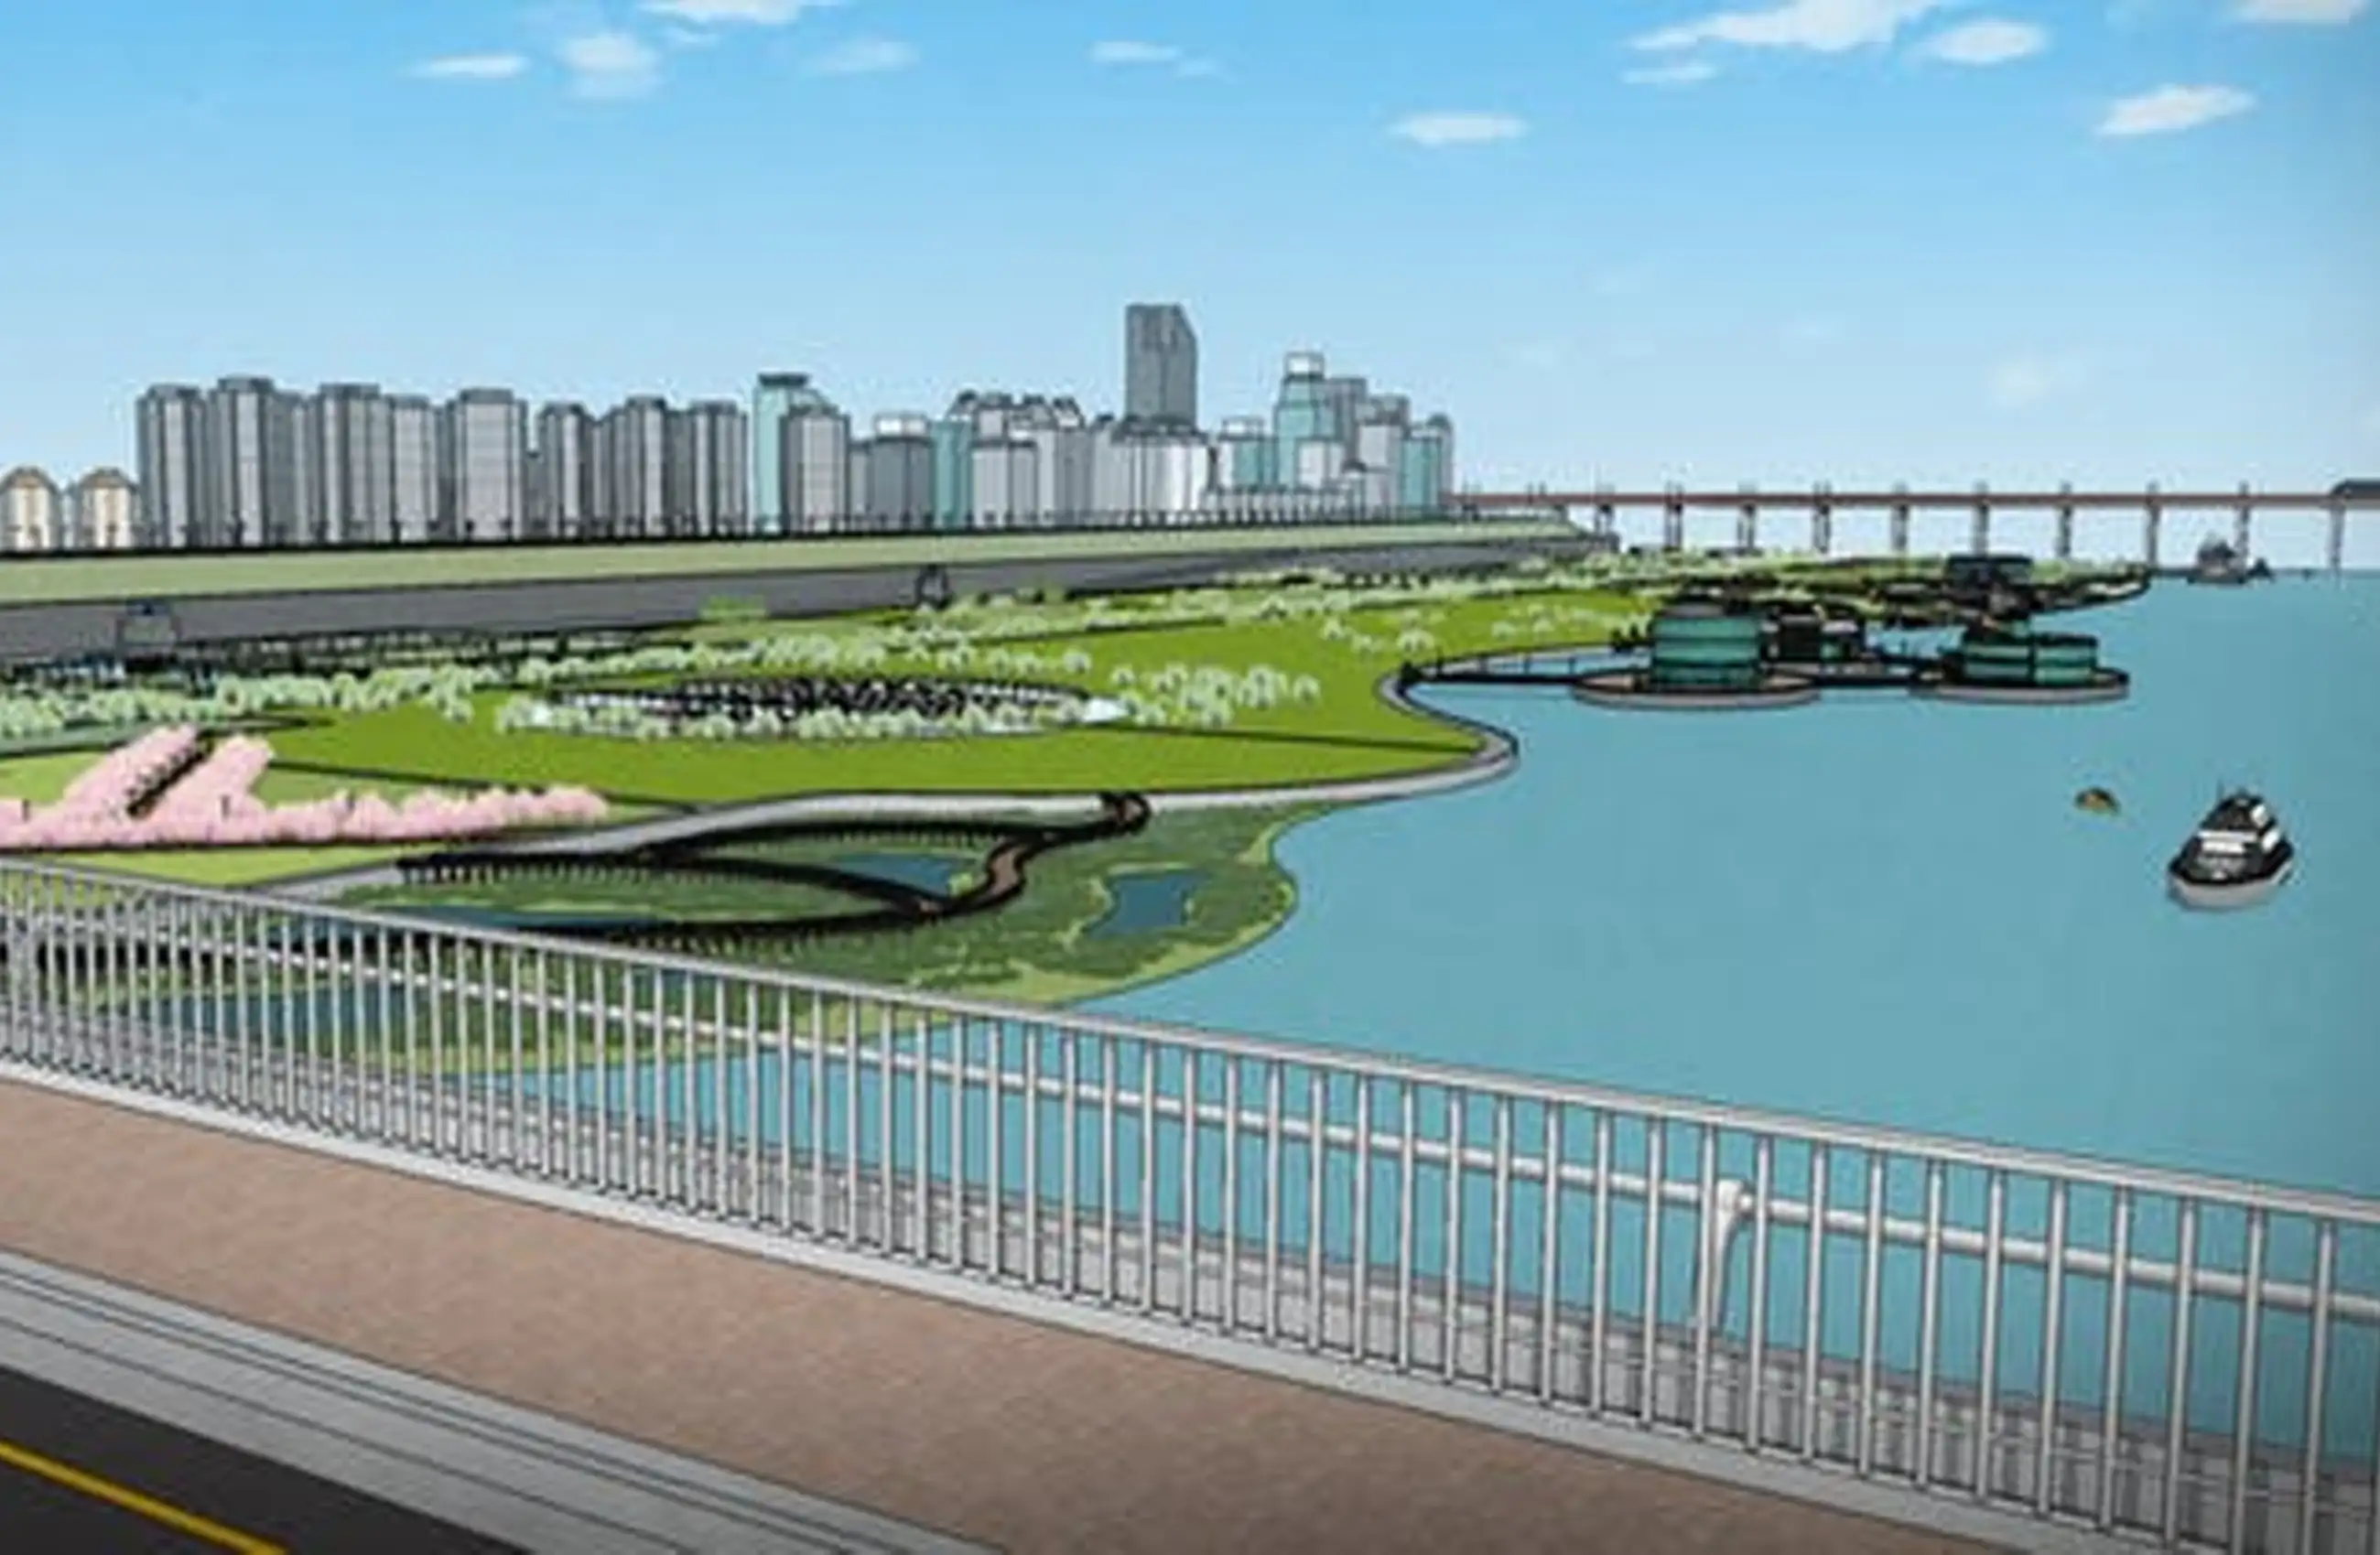 High waterfront of the Han River